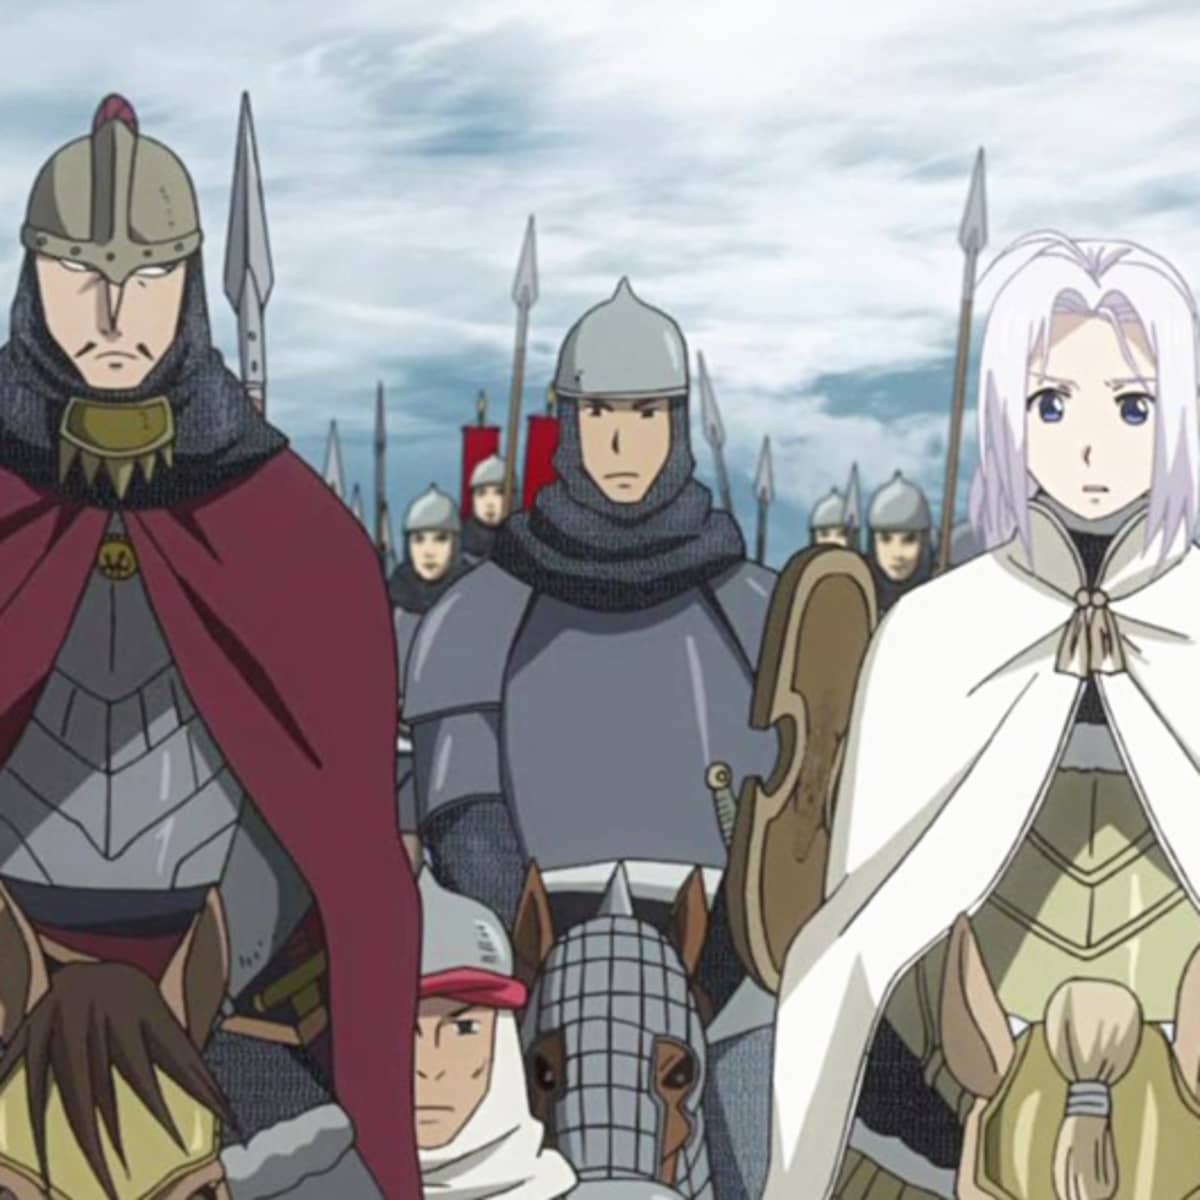 Buy ARSLAN: THE WARRIORS OF LEGEND from the Humble Store